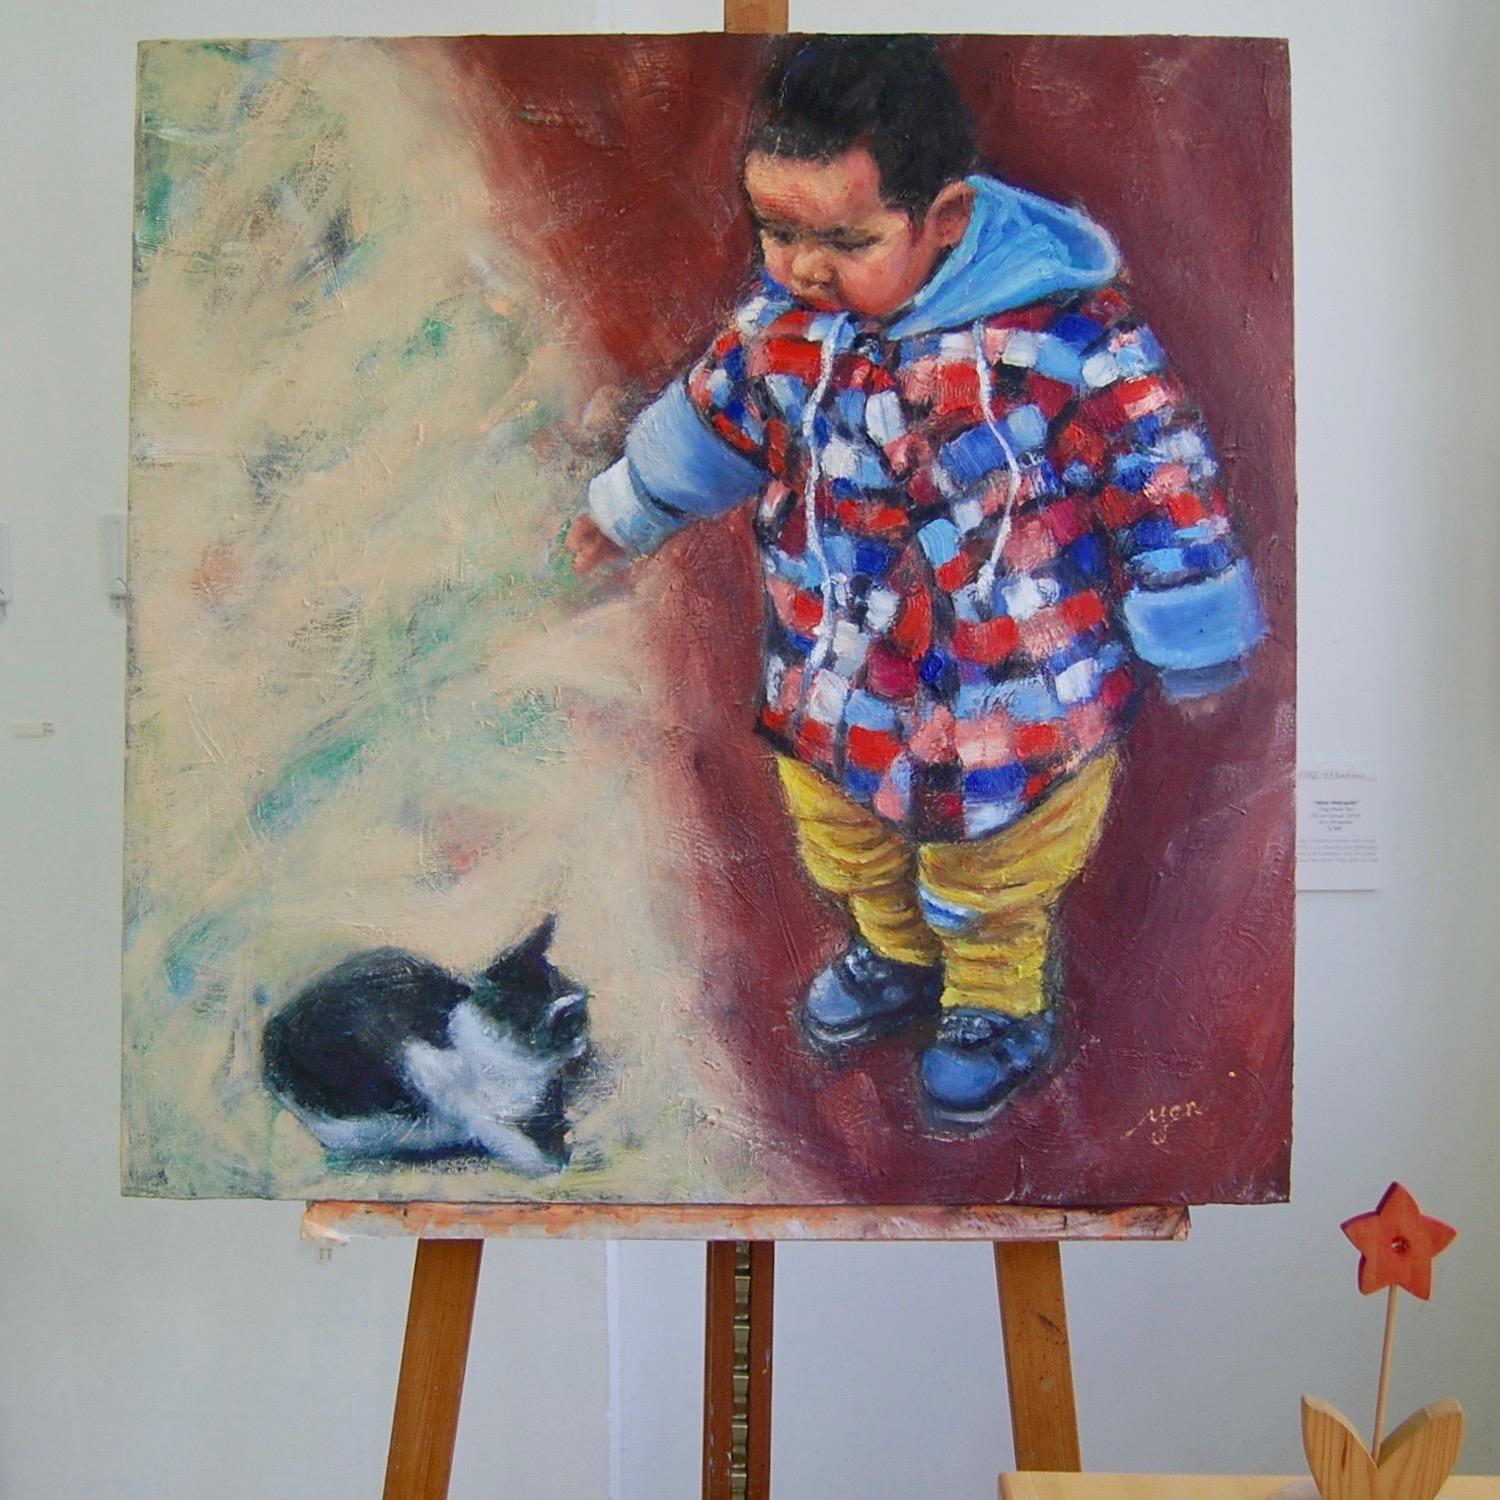 Boy & Cat - Whimsical Impressionist Child Figurative Painting,  original oil artwork of innocence and curiosity by Singapore artist